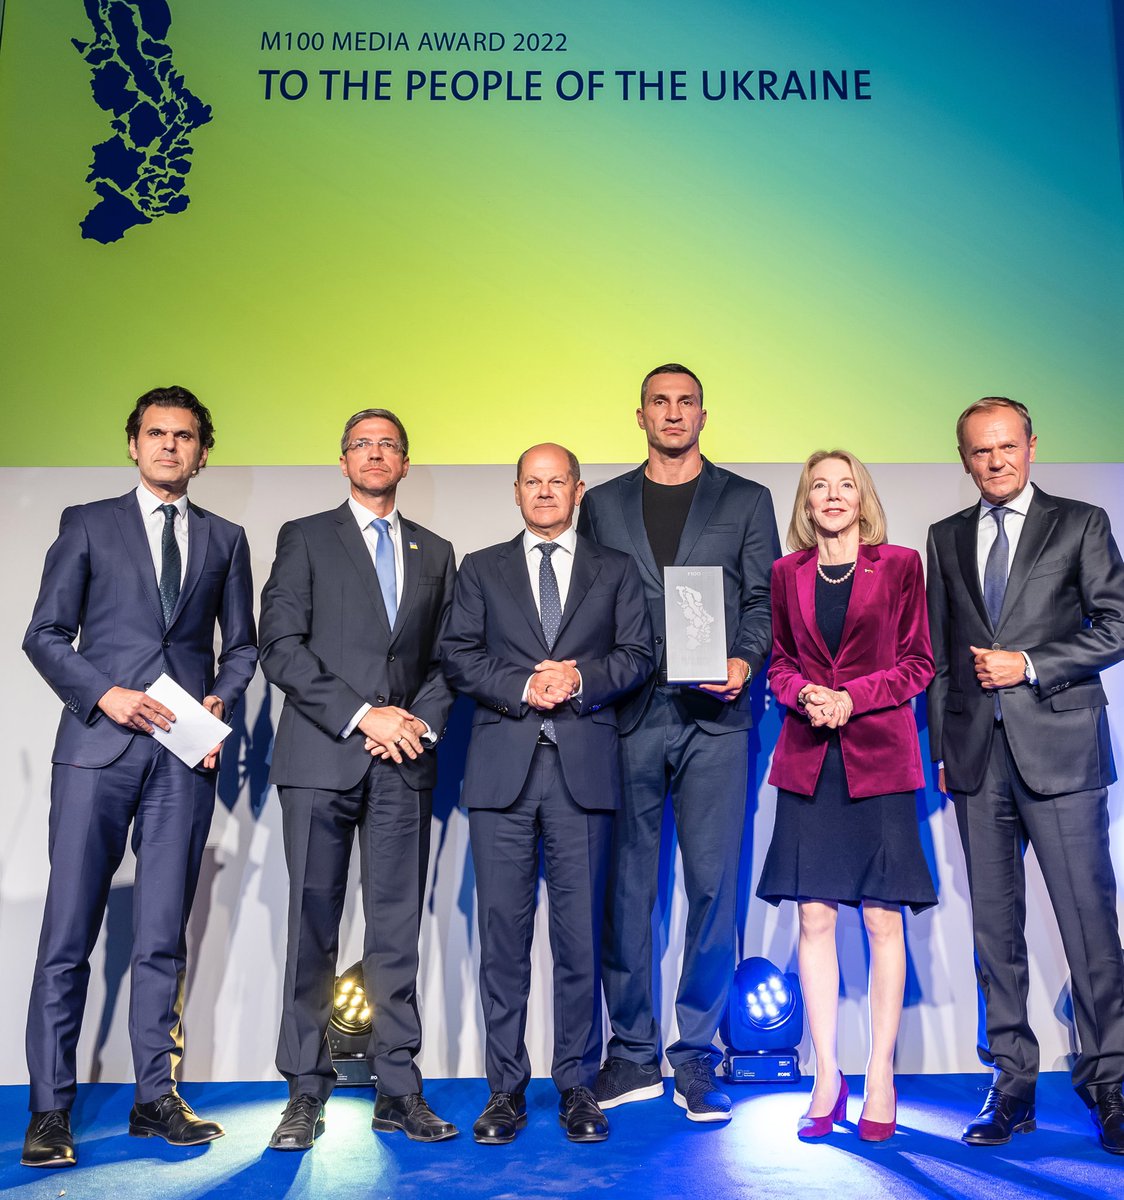 Congratulations to @donaldtusk on his election as Prime Minister of Poland. I had the pleasure of sharing the stage with him, alongside @Bundeskanzler Olaf Scholz & Wladimir @Klitschko, at last year’s M100 Media Award ceremony in Potsdam